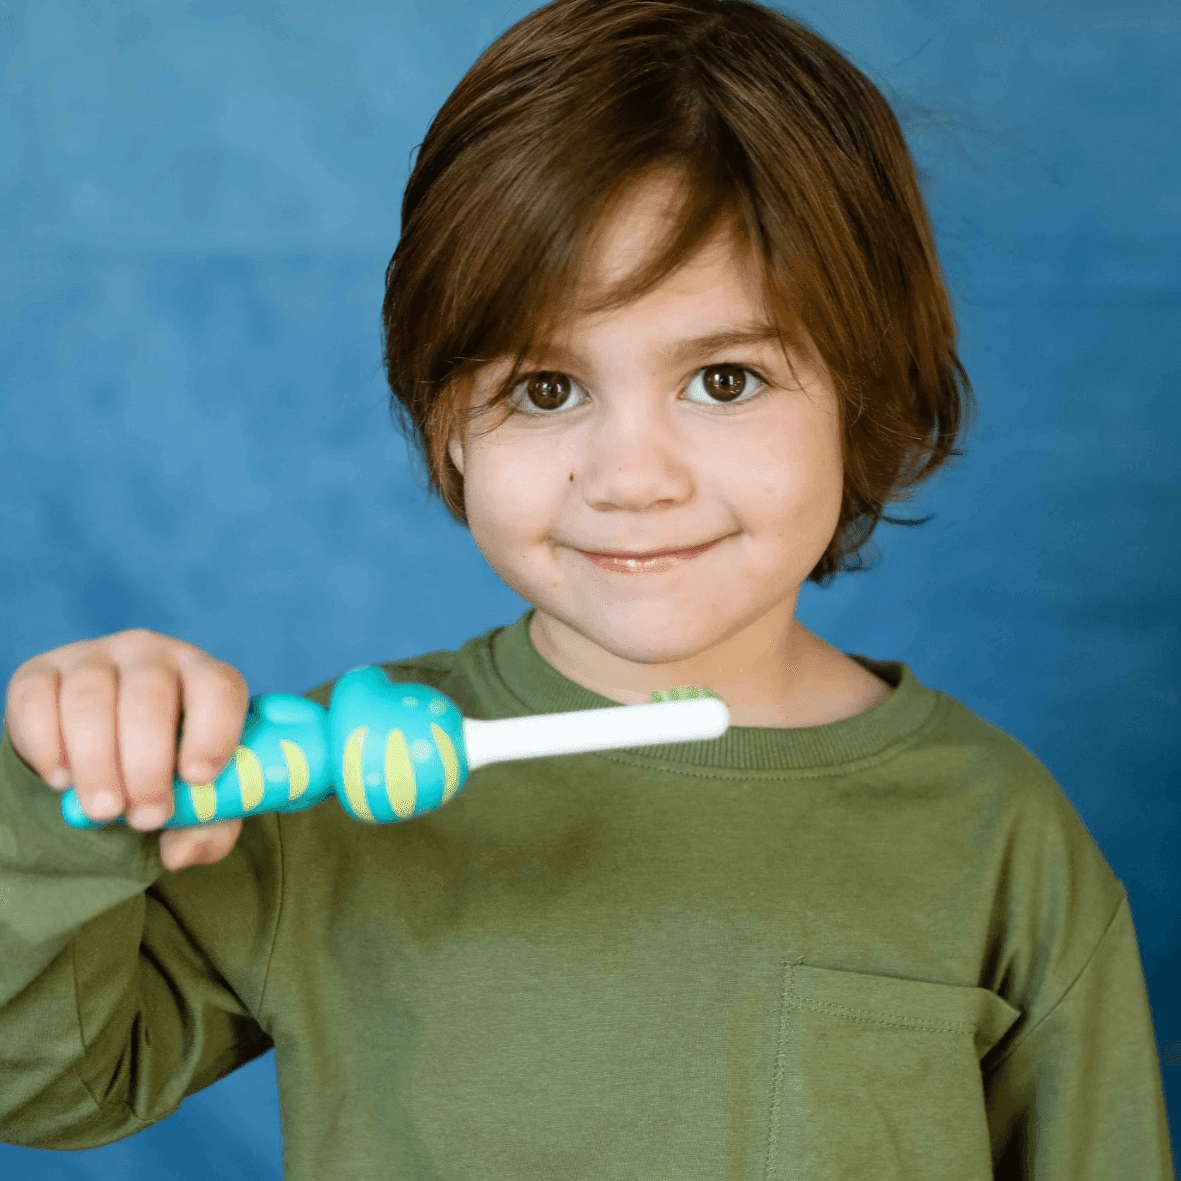 A young child gripping a Brushy the Brushasaurus toothbrush